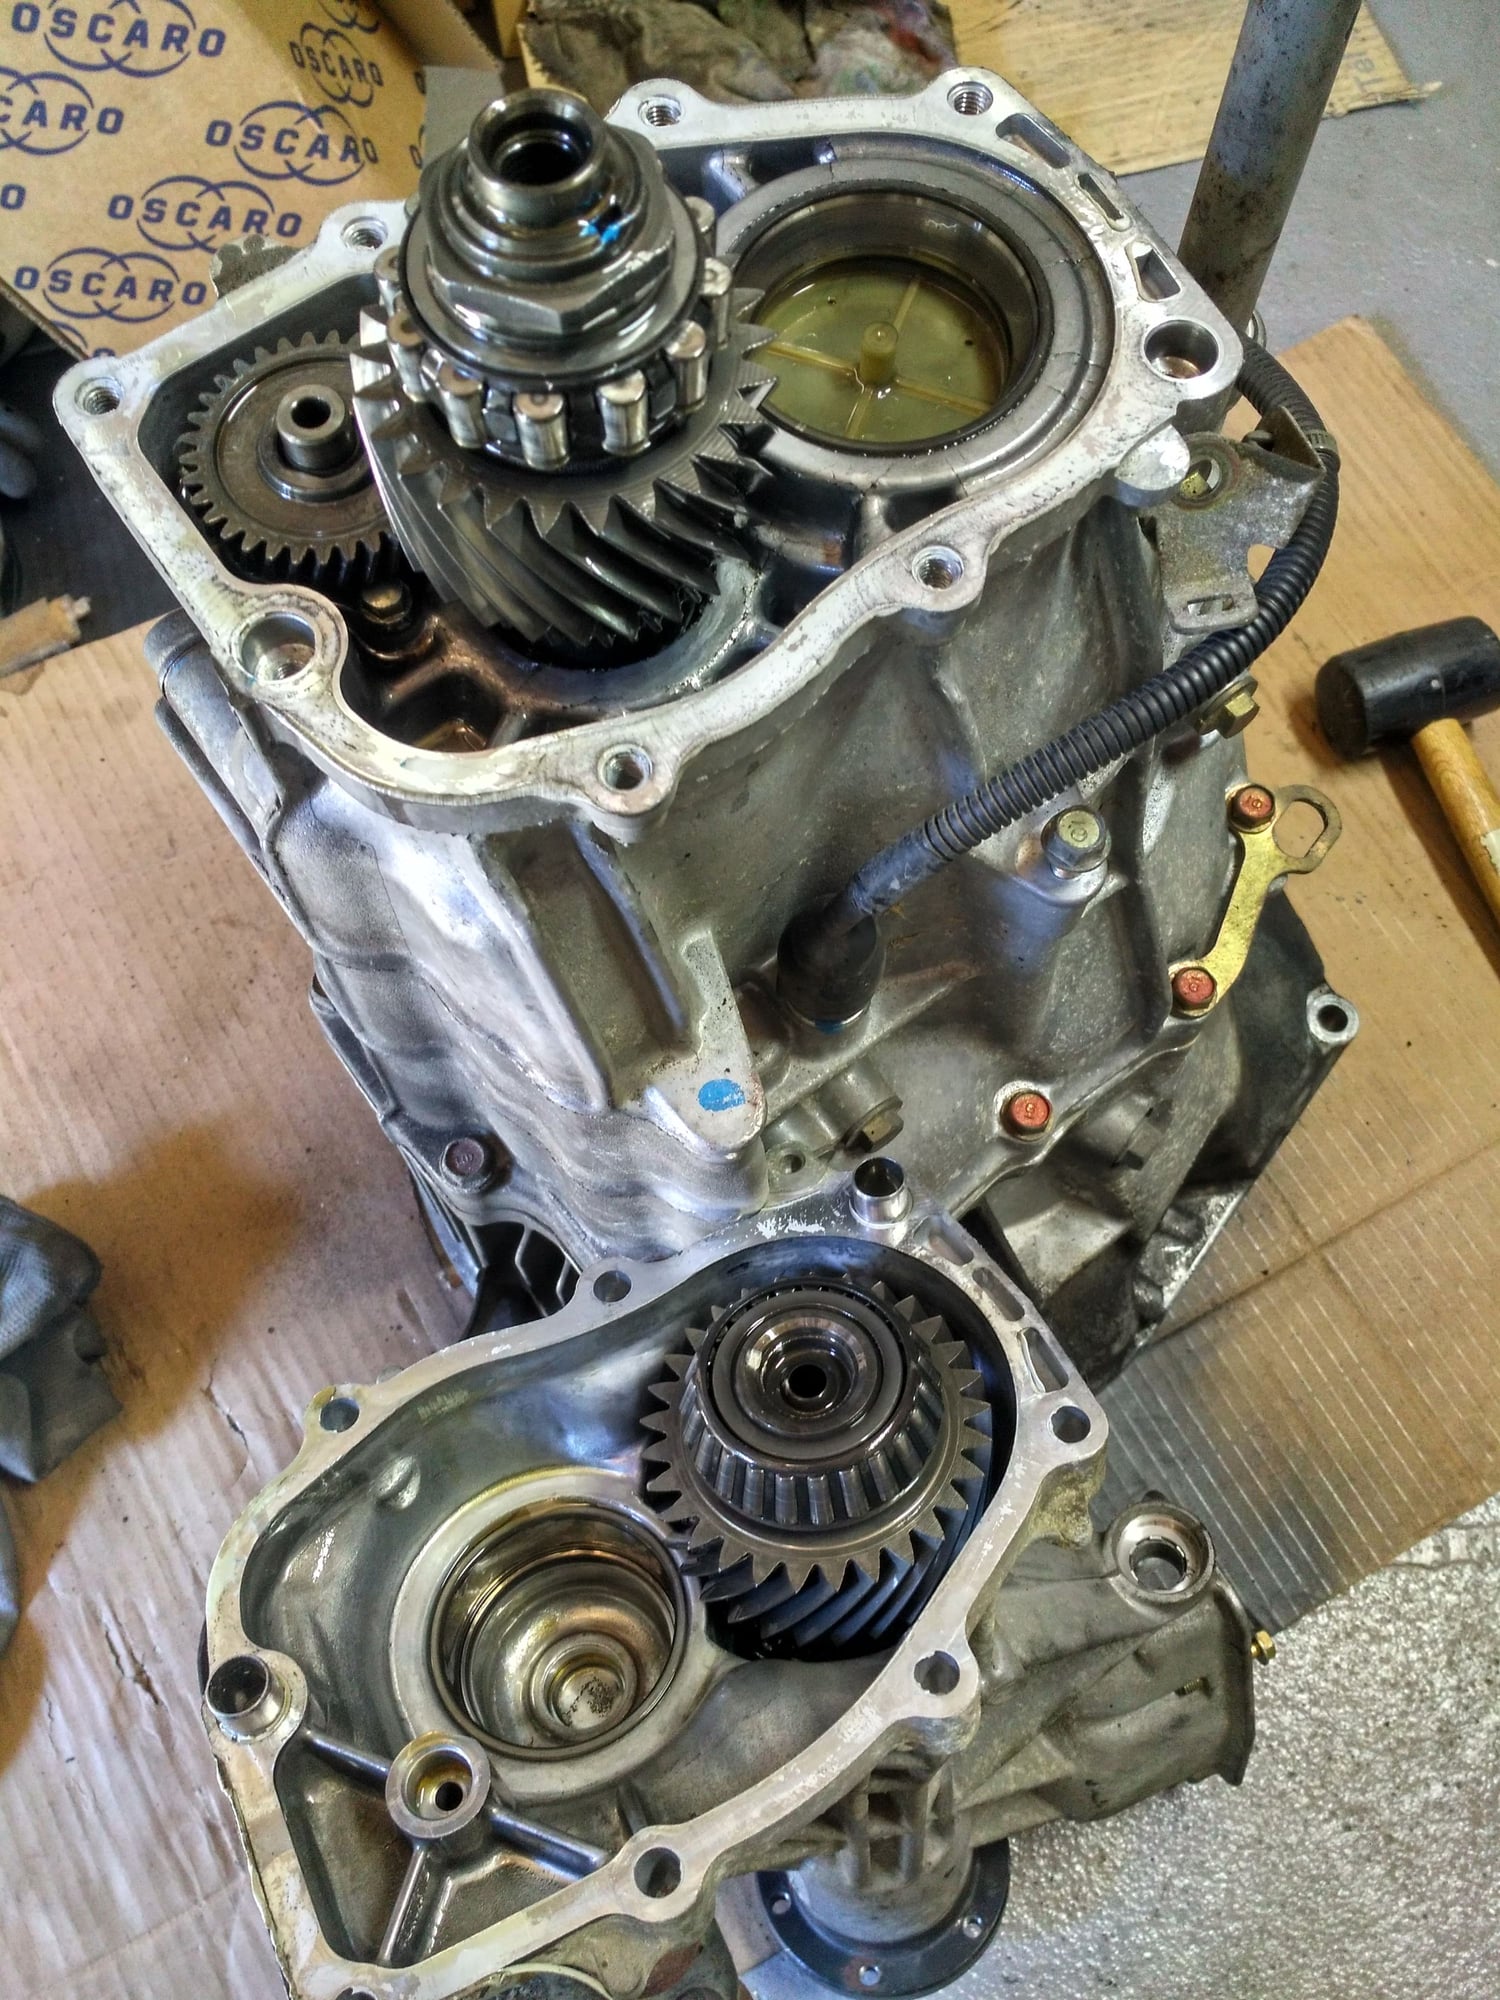 Gear box / transmission whining noise.. - Page 13 - S2KI Honda S2000 Forums